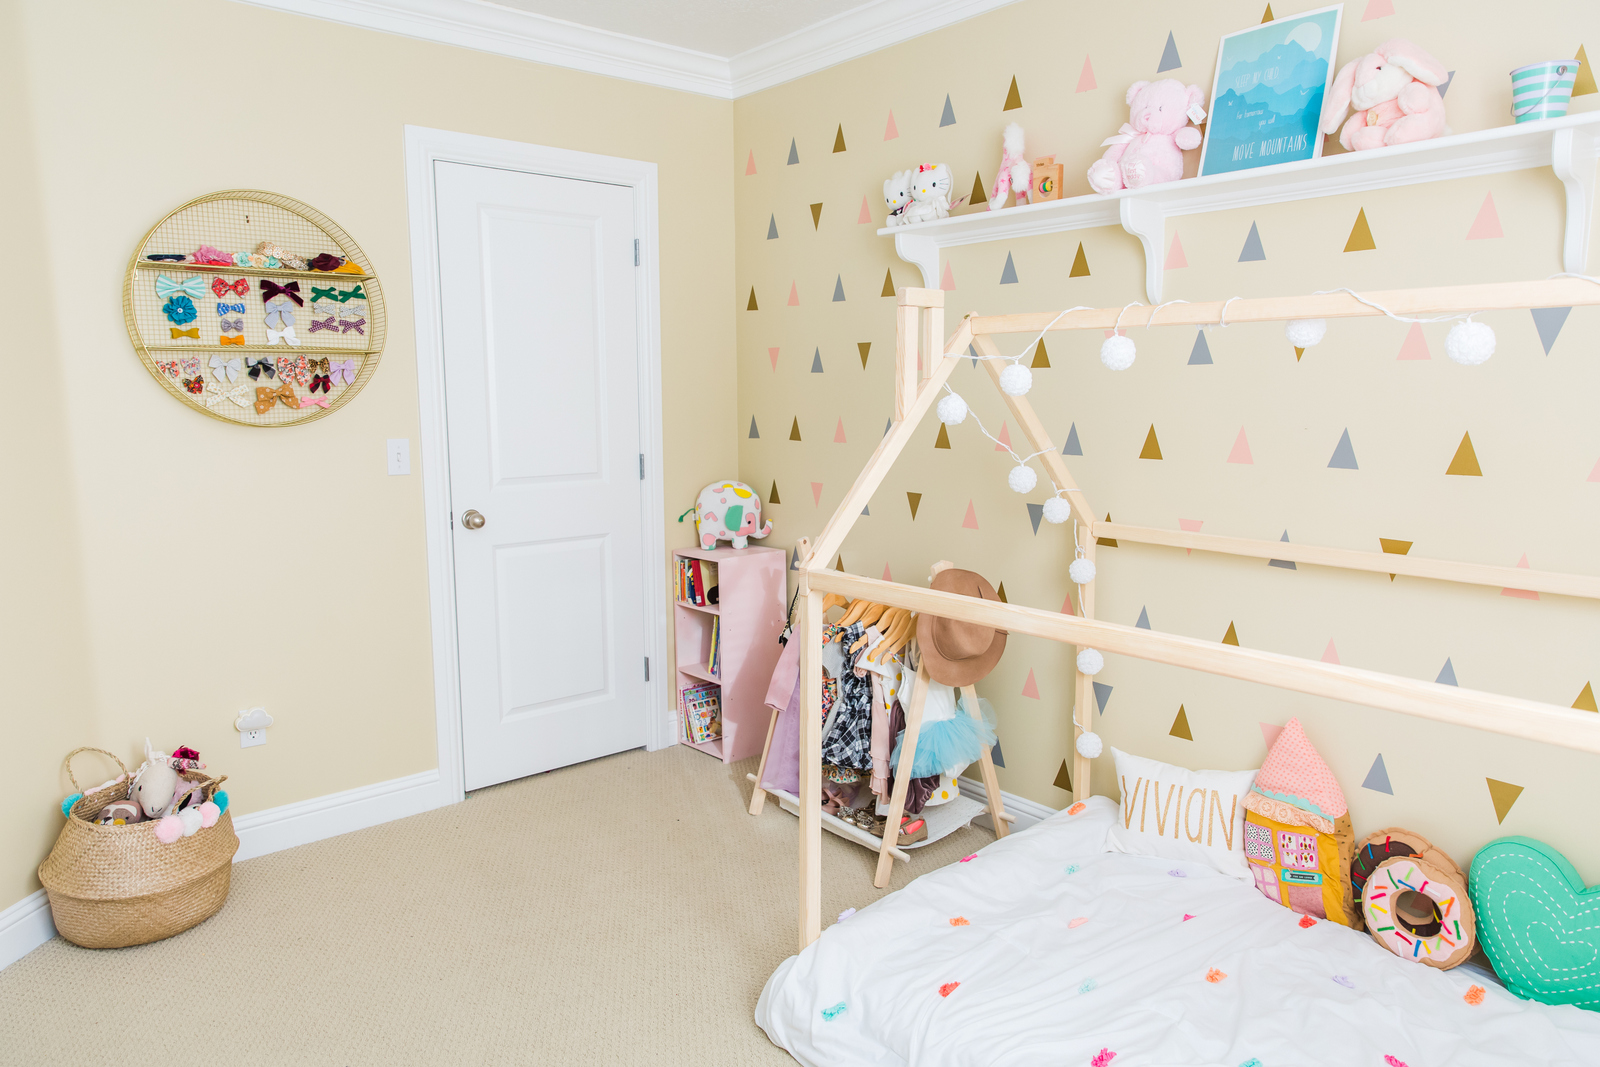 Vivian's Bedroom Reveal: Little Girls Bedroom Ideas You'll Want to Steal